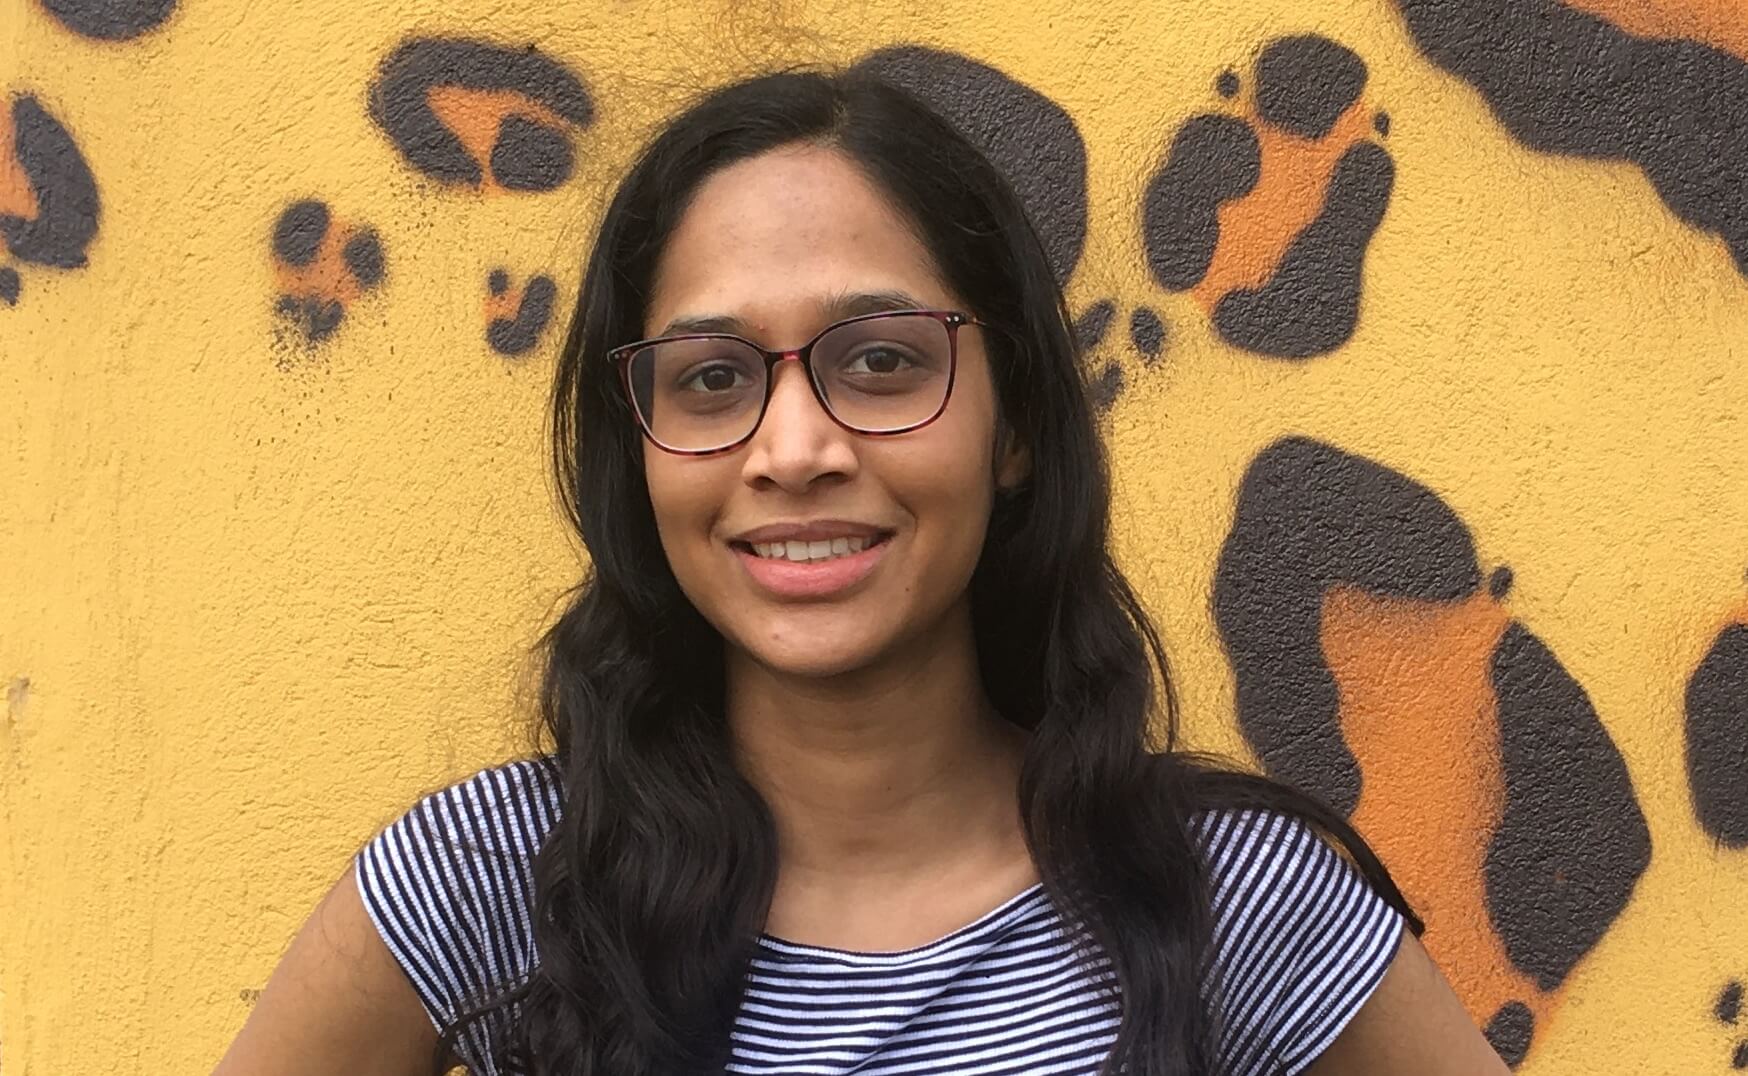 Sara Sinha smiling and posing in front of a wall.